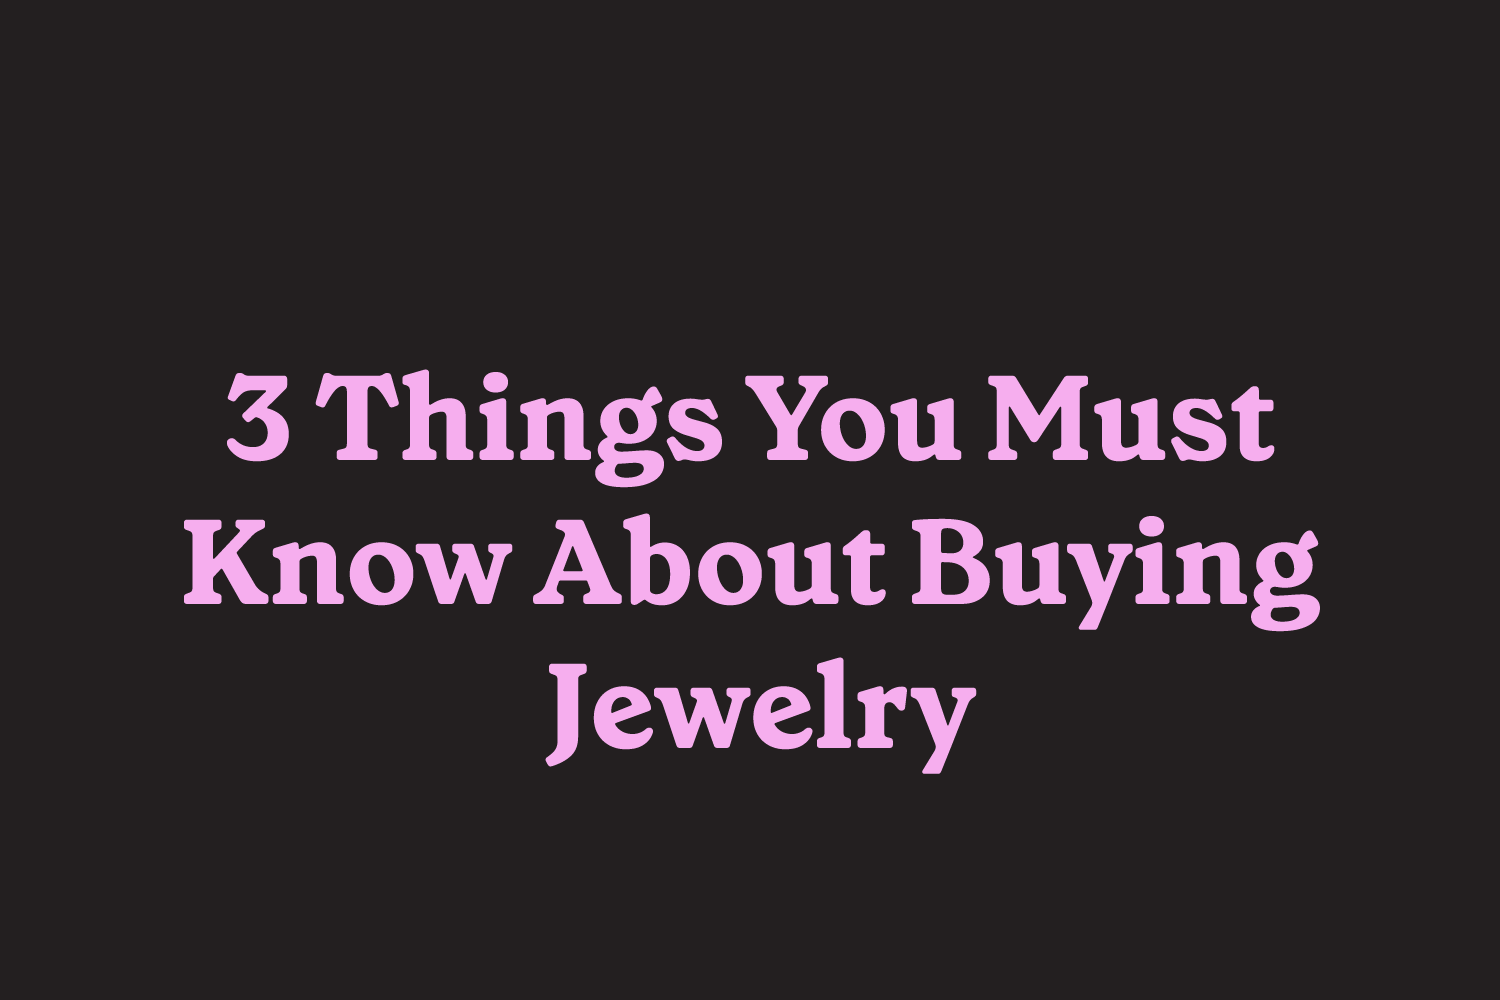 3 Things You Must Know: From a Jewelry Expert (Part 1)